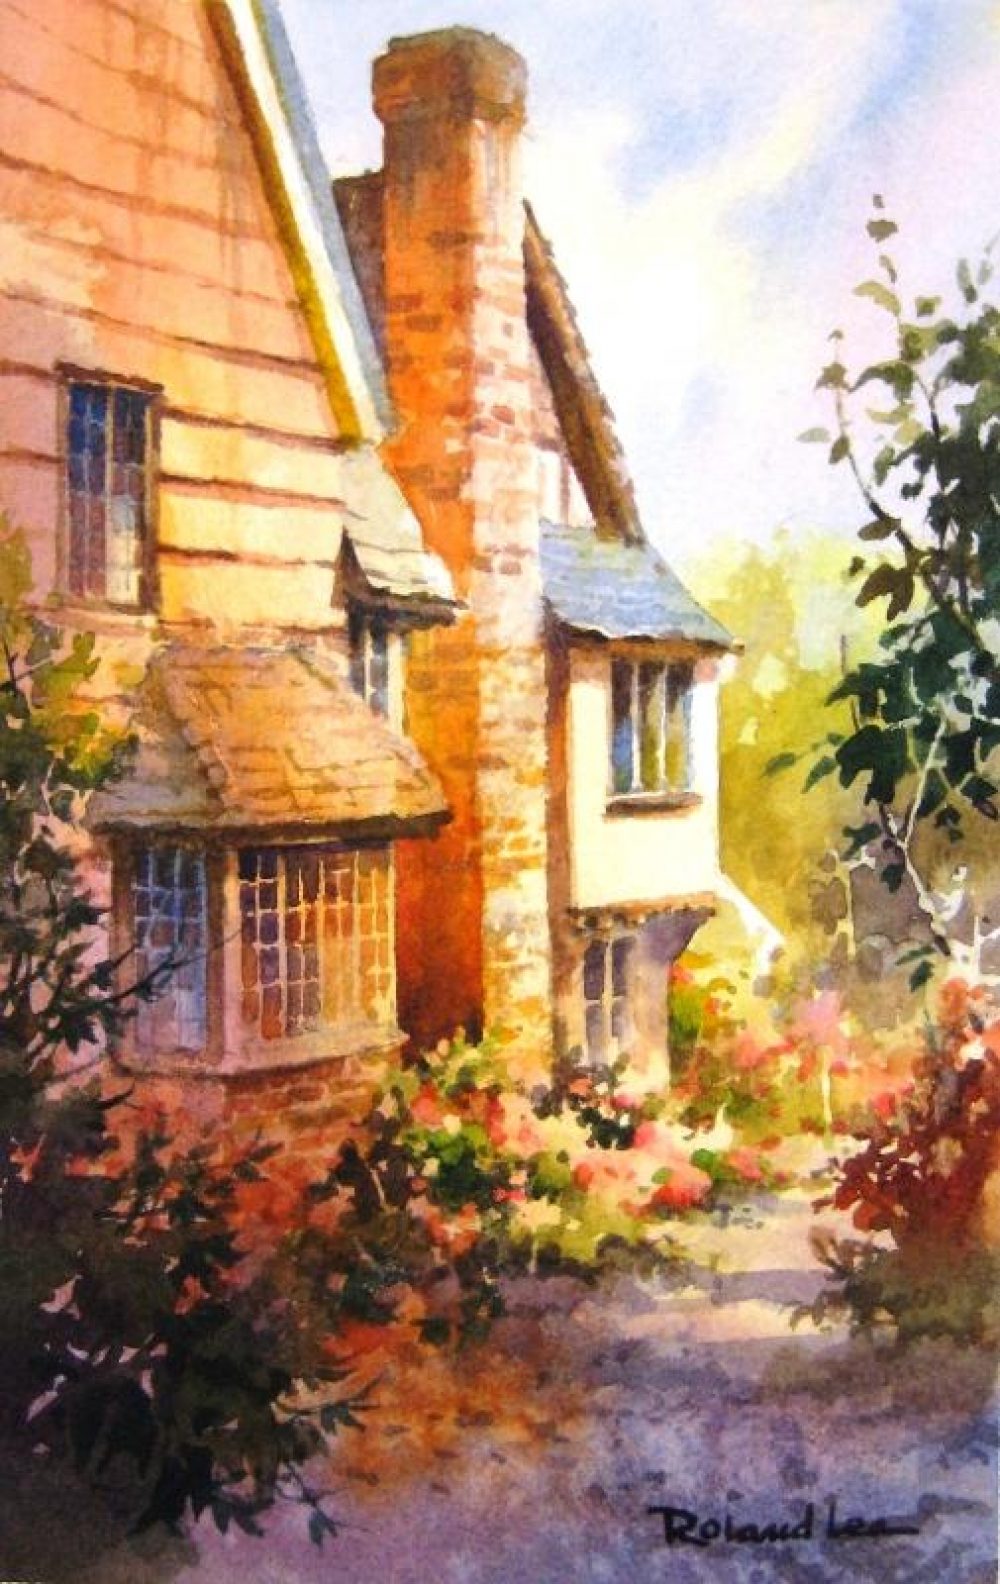 Cottage Lane - Kent England - Watercolor Painting of Kent England Cottages